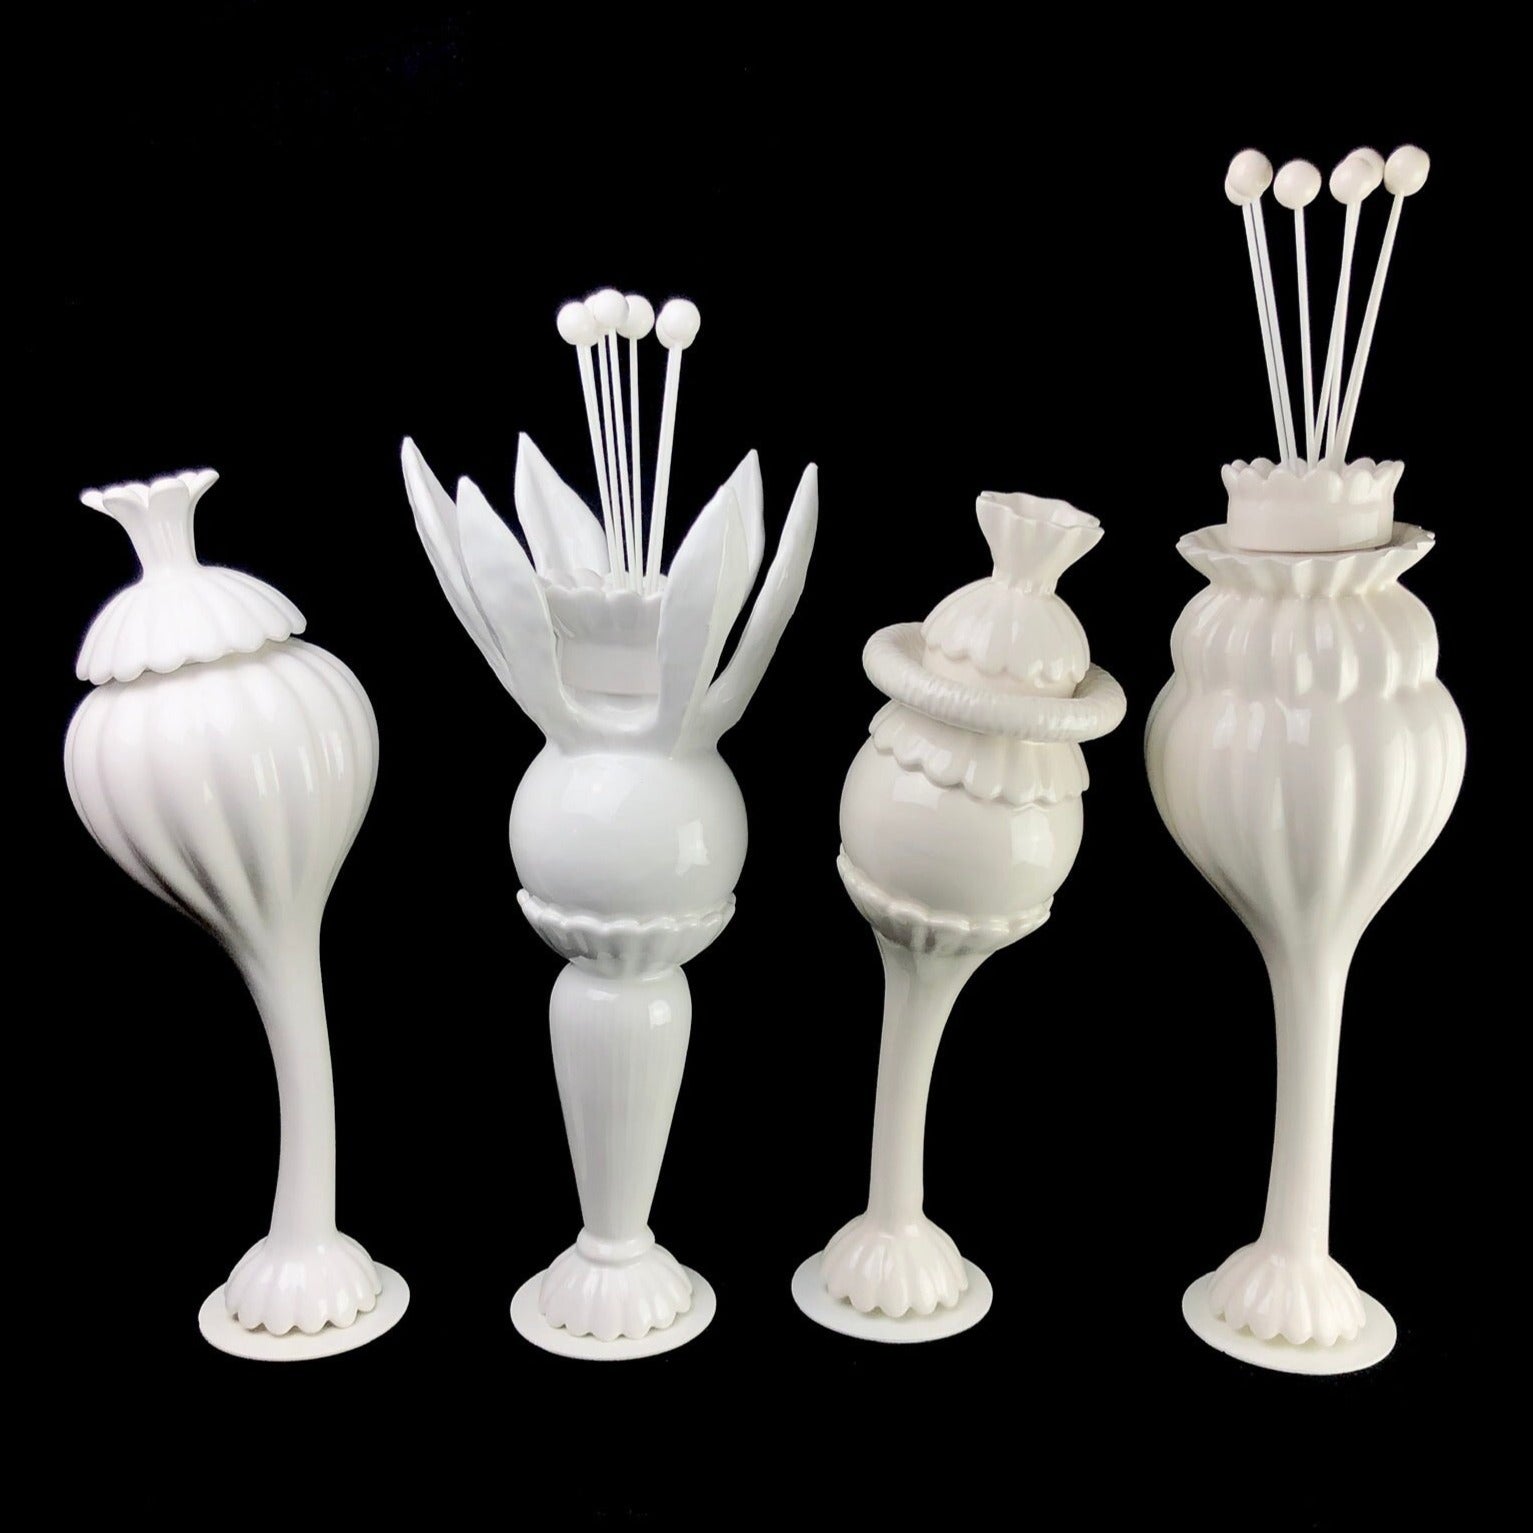 Four designs of Ceramic Flower Oil Diffuser available for sale